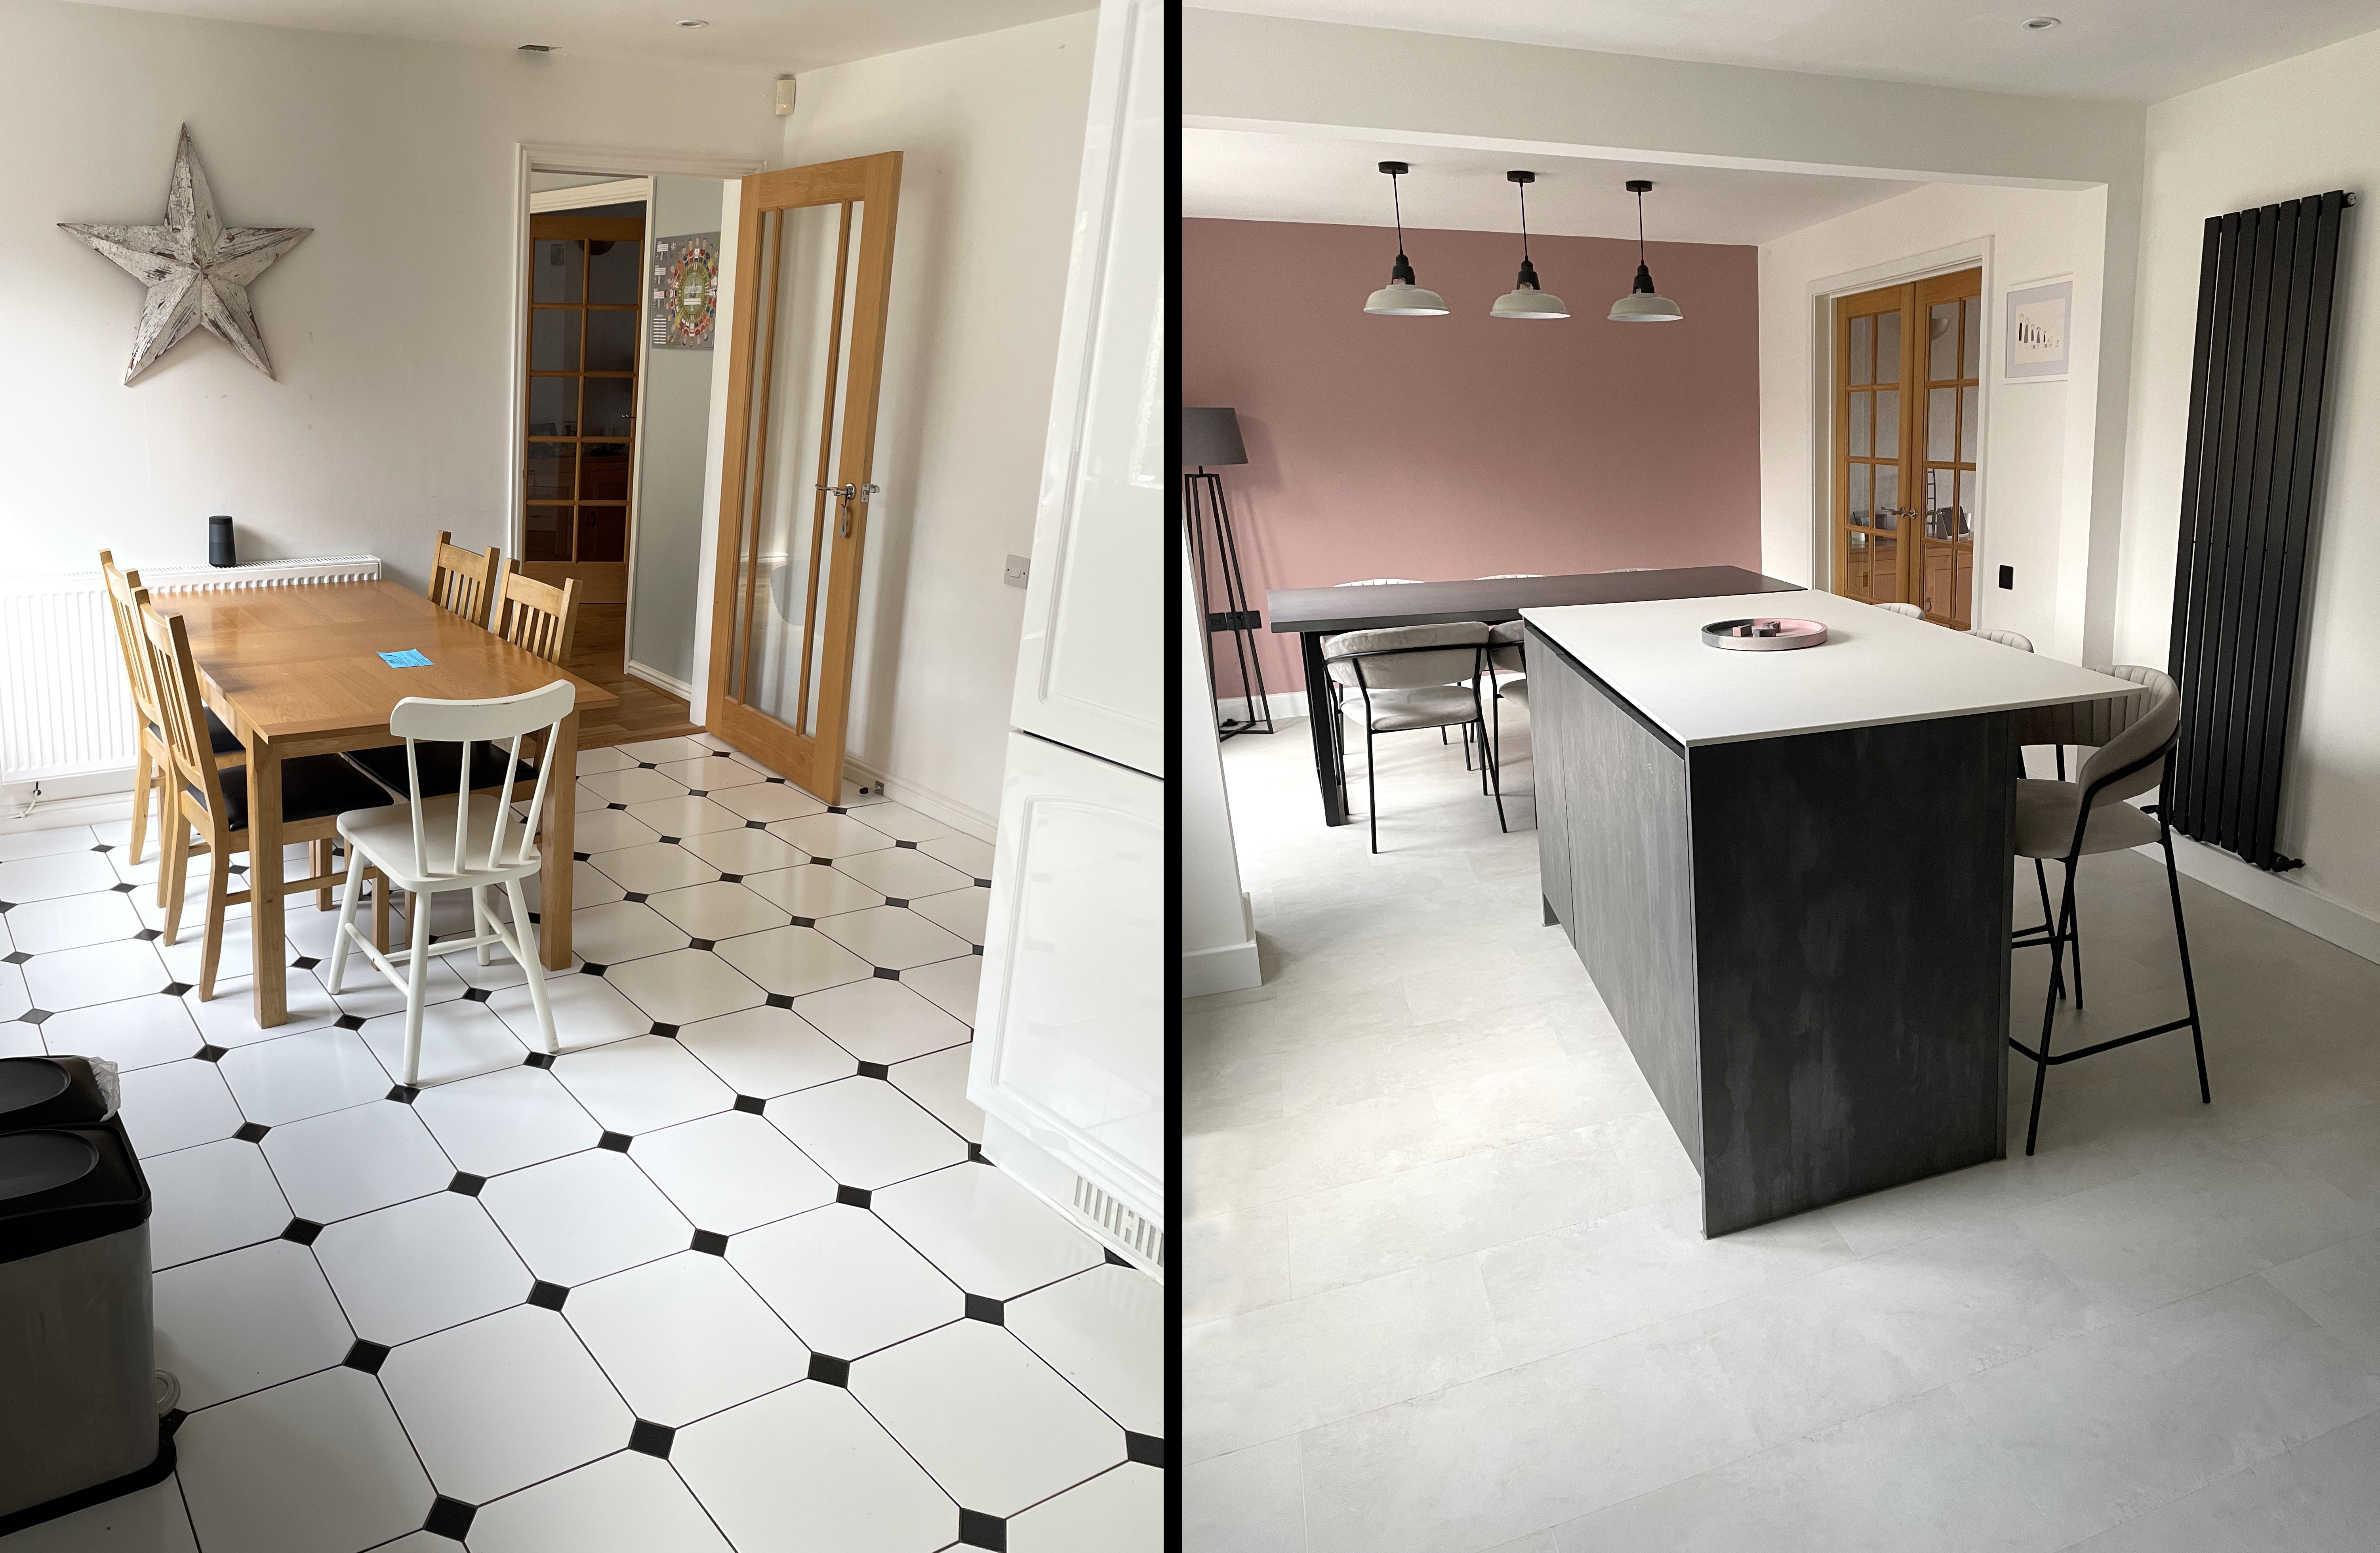 Contemporary style kitchen & dining space with two tone cabinets by Charlotte O'Neill 7